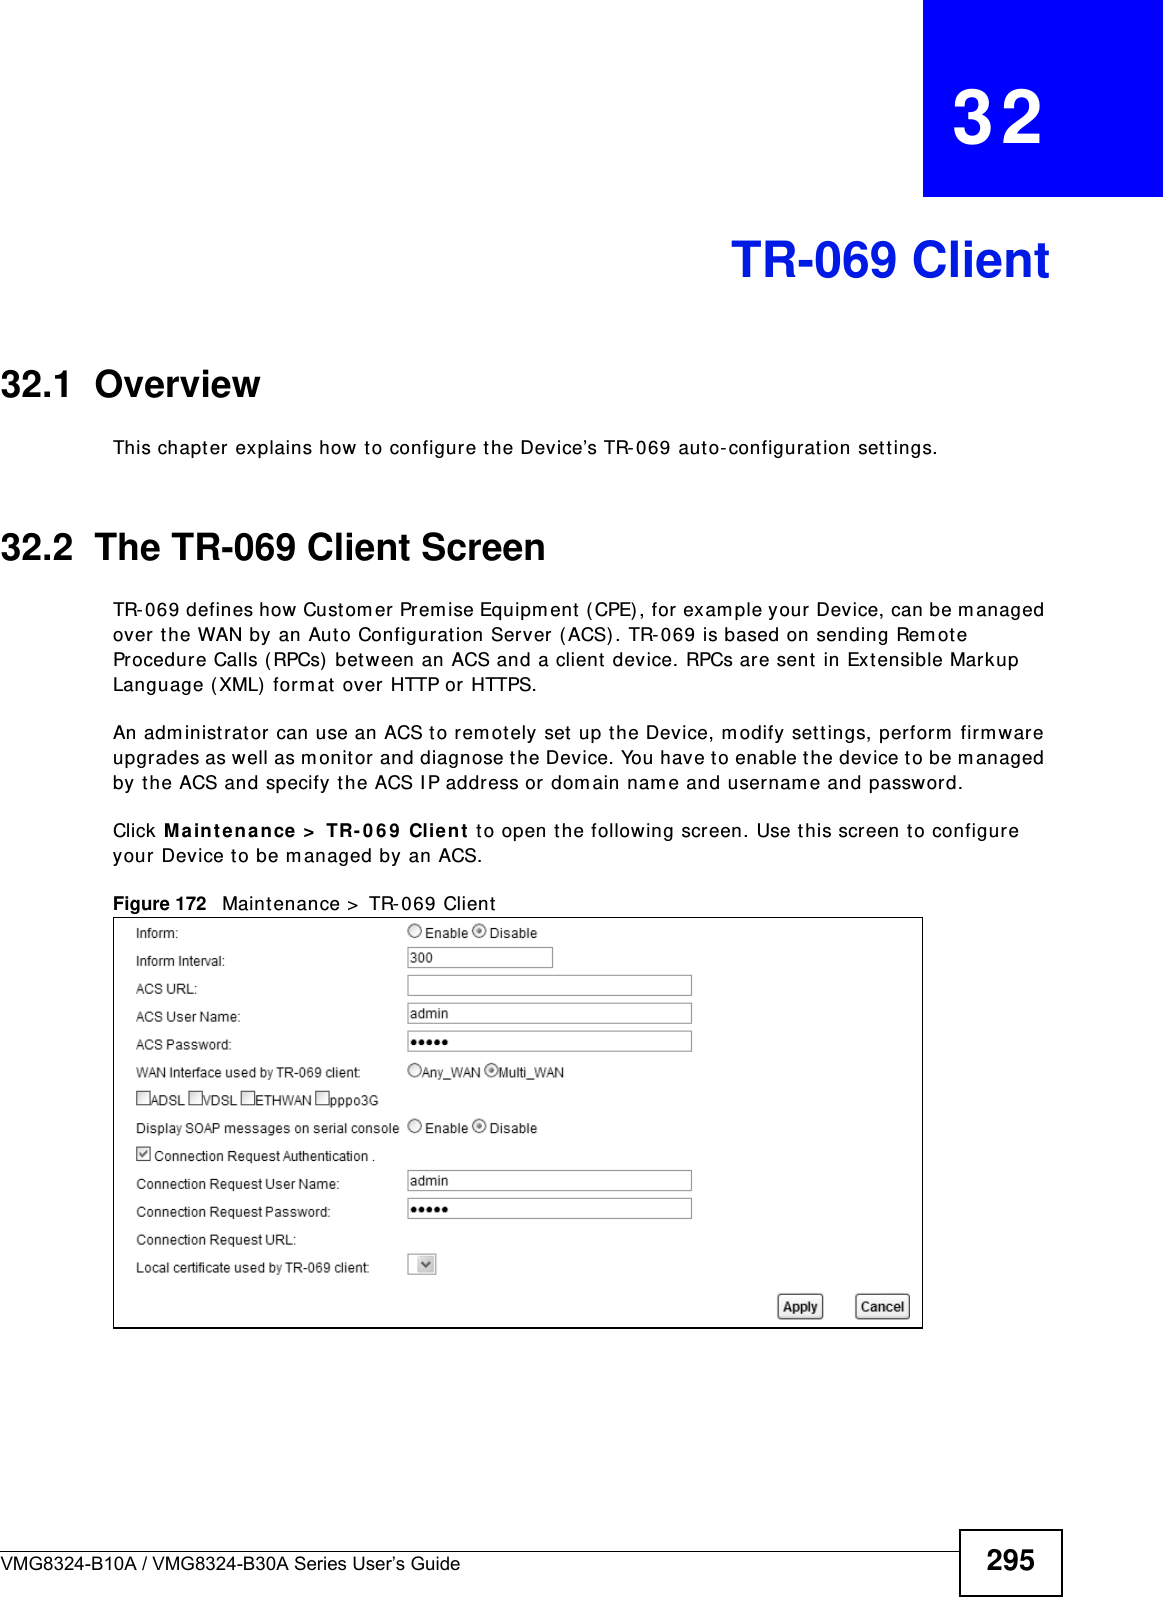 VMG8324-B10A / VMG8324-B30A Series User’s Guide 295CHAPTER   32TR-069 Client32.1  OverviewThis chapt er explains how to configure t he Device’s TR- 069 aut o-configurat ion set tings.32.2  The TR-069 Client ScreenTR- 069 defines how Custom er Pr em ise Equipm ent  ( CPE) , for exam ple your Device, can be m anaged over  t he WAN by an Auto Configurat ion Ser ver ( ACS) . TR-069 is based on sending Rem ote Procedure Calls ( RPCs) bet ween an ACS and a client device. RPCs are sent  in Extensible Markup Language (XML) form at  over HTTP or HTTPS. An adm inist rat or can use an ACS to rem otely set  up the Device, m odify set tings, perform firm ware upgrades as well as m onit or and diagnose t he Device. You have to enable t he device t o be m anaged by the ACS and specify t he ACS I P address or dom ain nam e and usernam e and password.Click Ma int ena nce &gt;  TR- 0 6 9  Client  t o open t he following screen. Use this screen to configure your Device t o be m anaged by an ACS. Figure 172   Maintenance &gt;  TR- 069 Client 